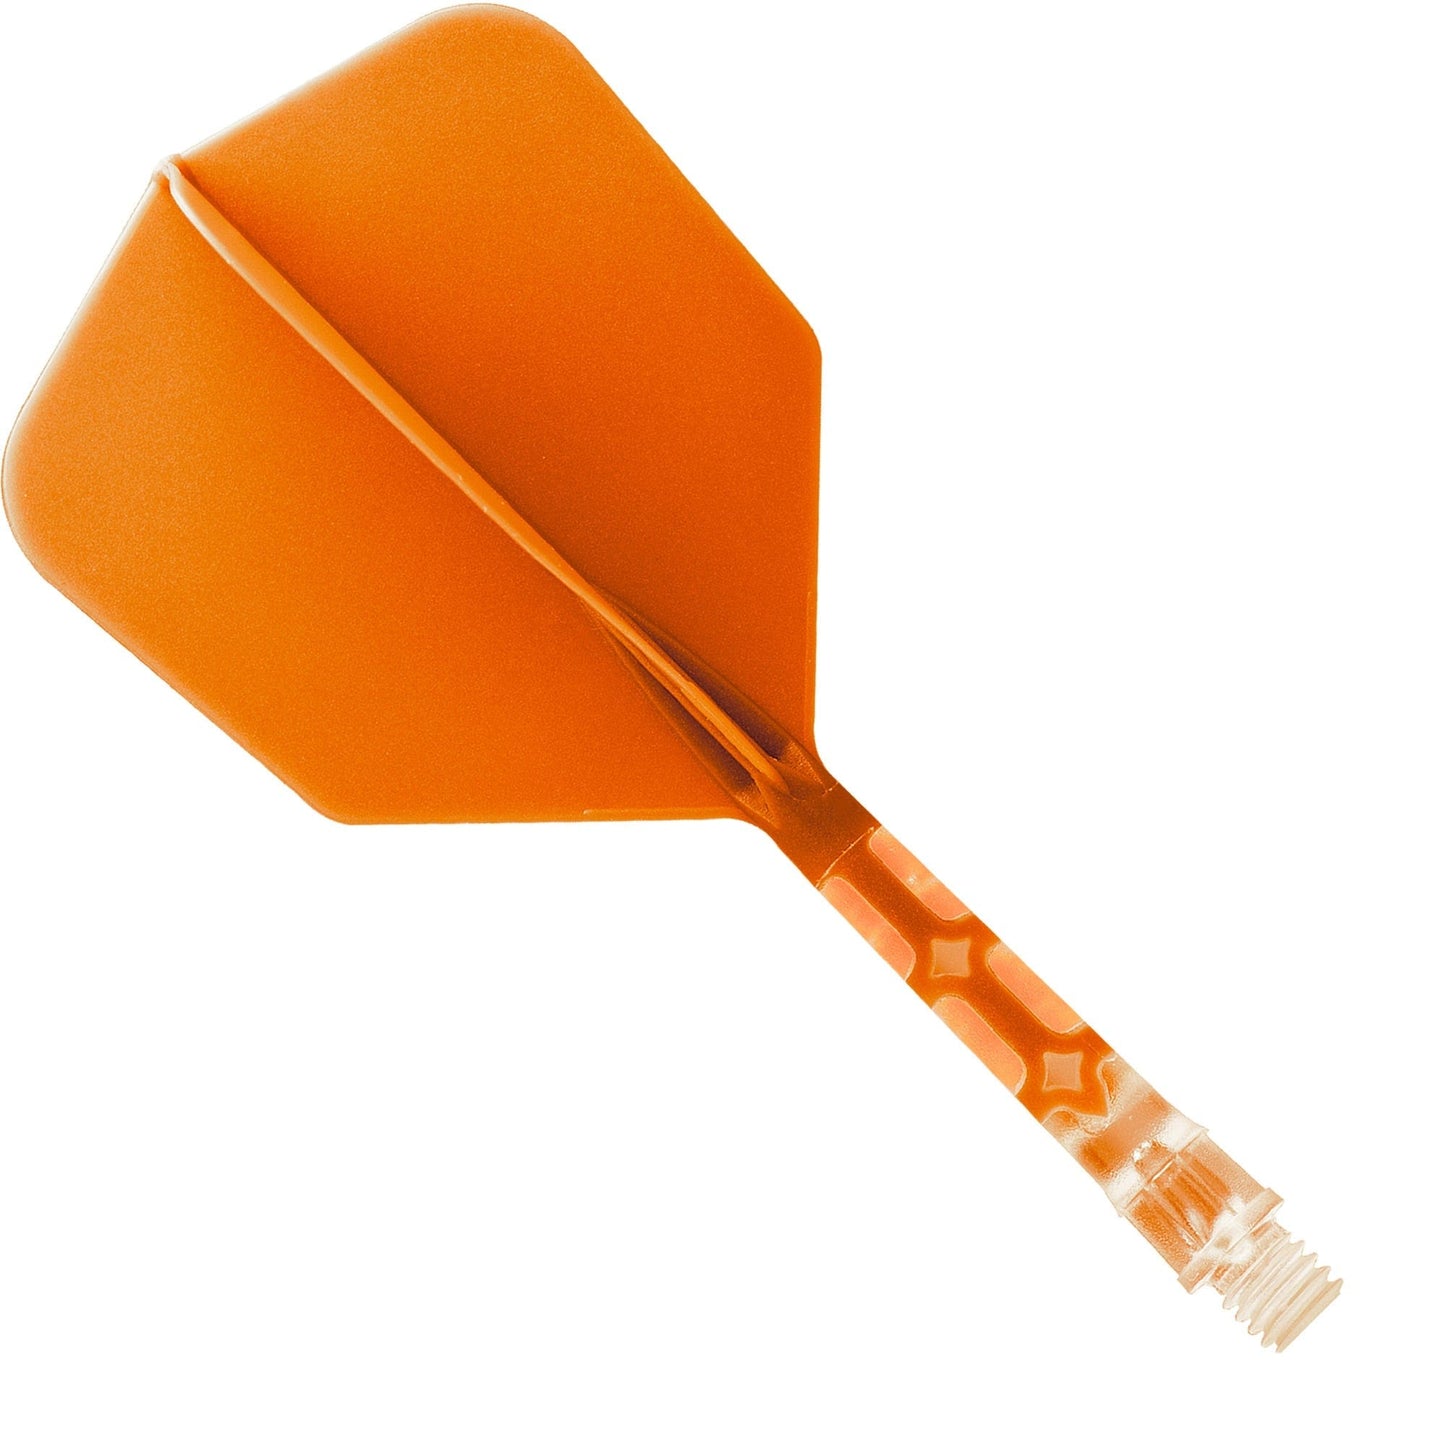 Cuesoul Rost T19 Integrated Dart Shaft and Flights - Big Wing - Clear with Orange Flight Medium